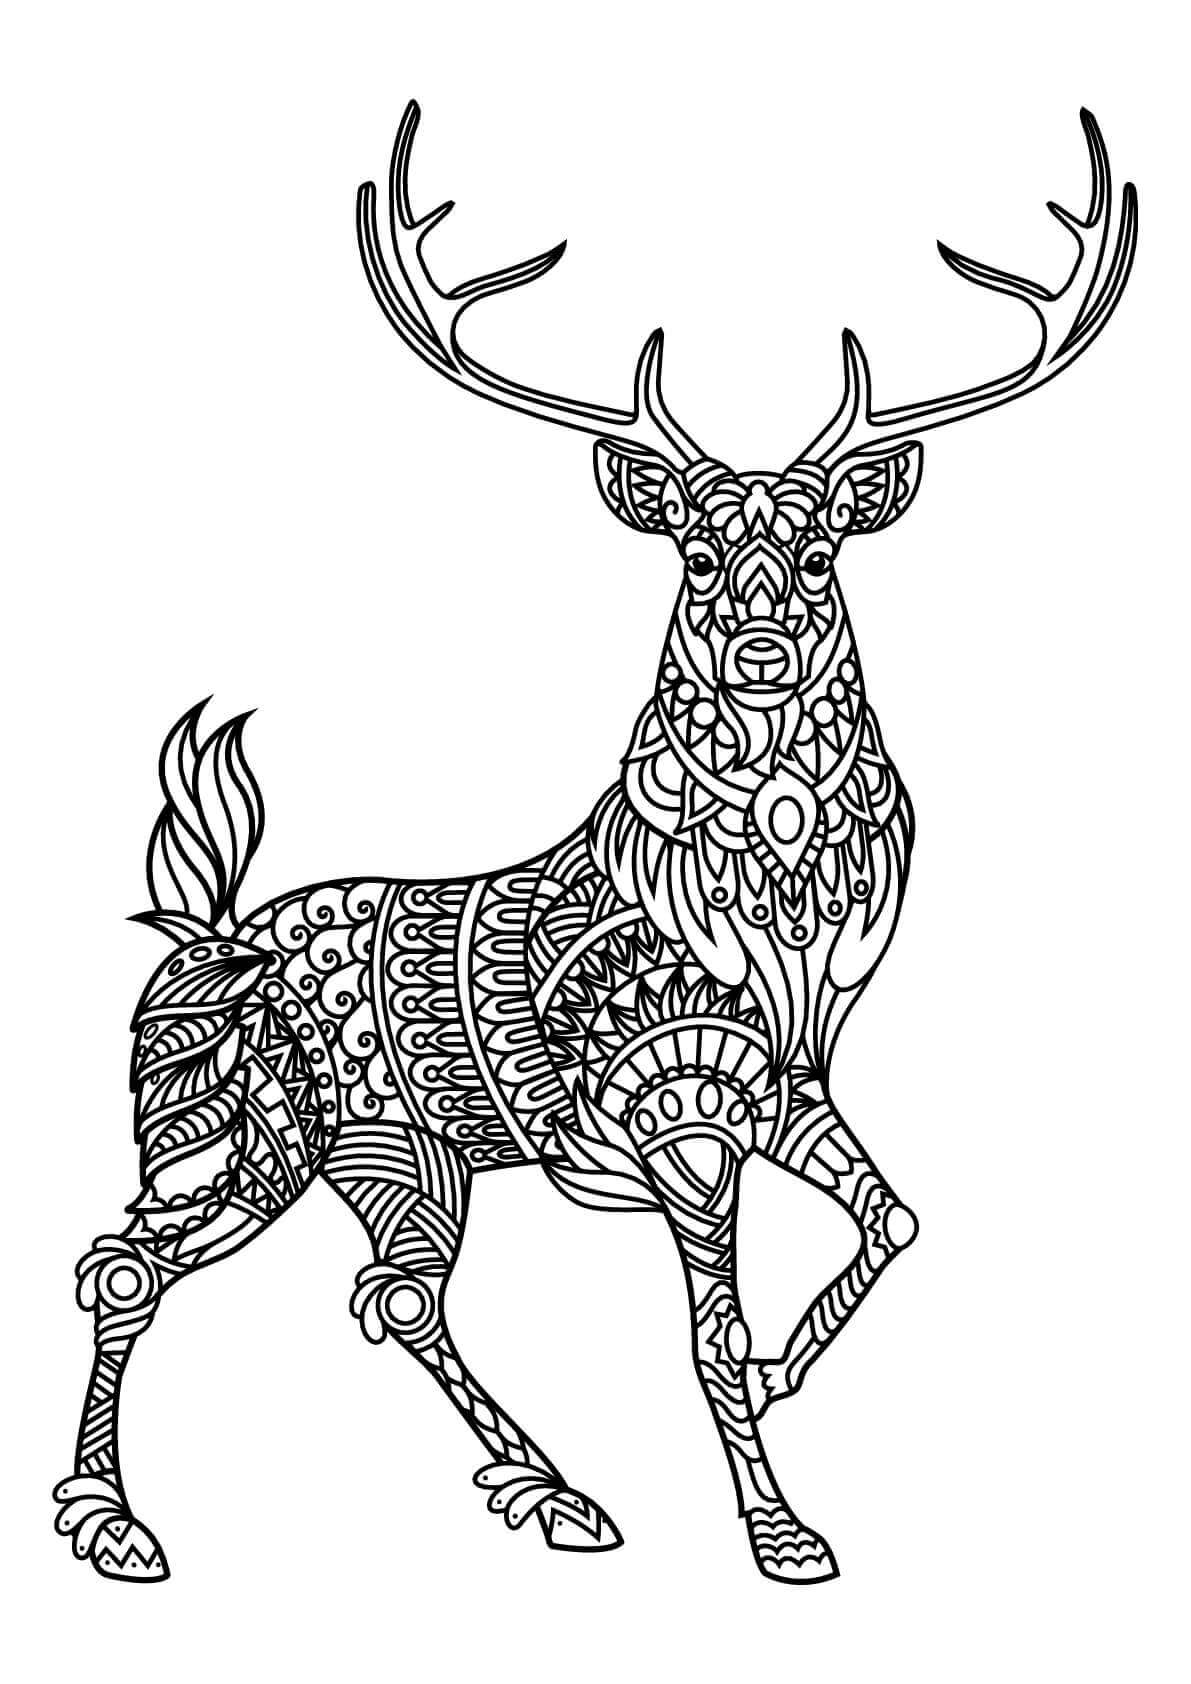 Zen Male Reindeer Coloring Page for Adults